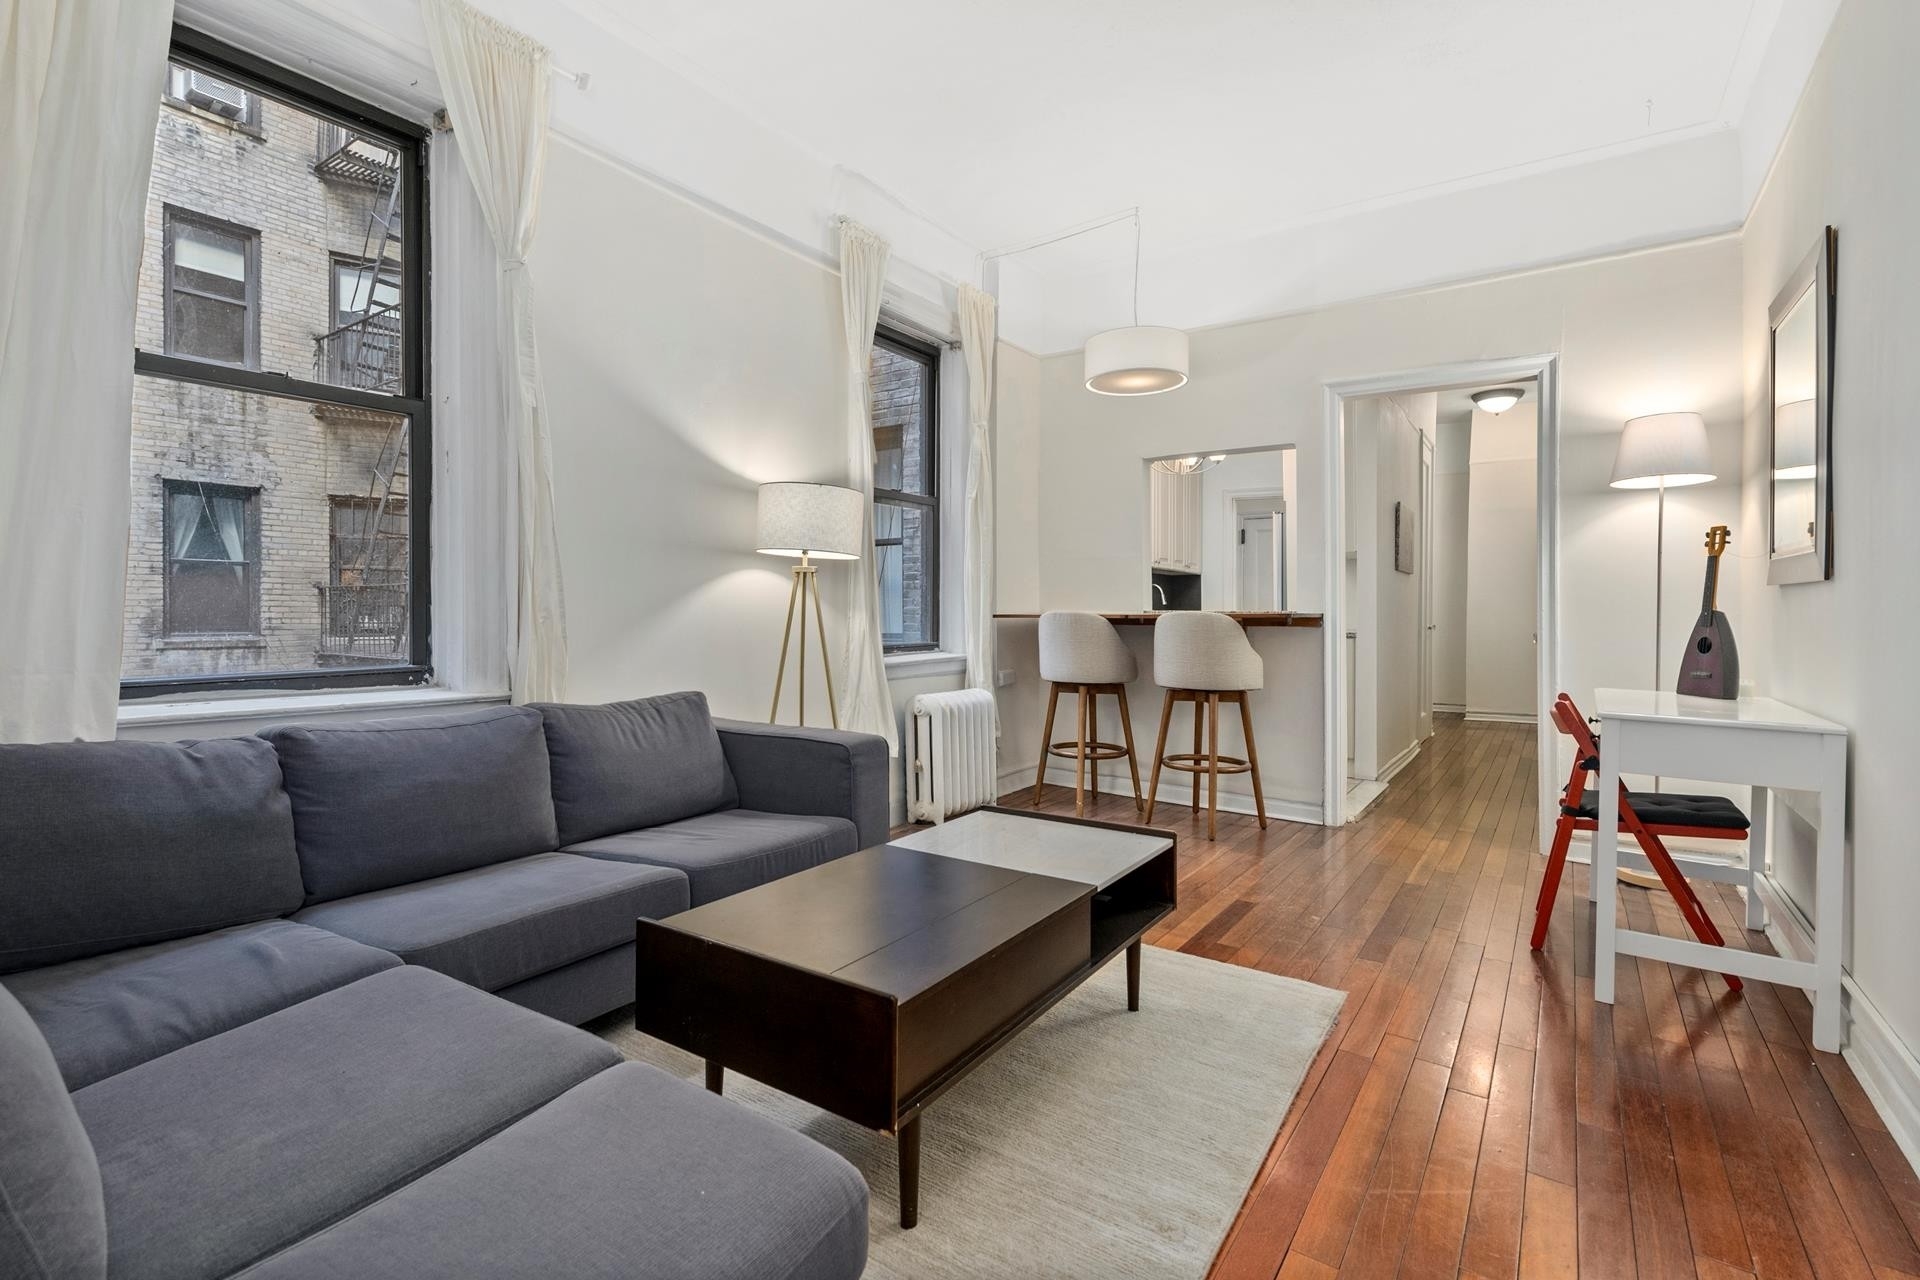 Co-op Properties for Sale at 166 E 92ND ST, 1C Upper East Side, New York, NY 10128